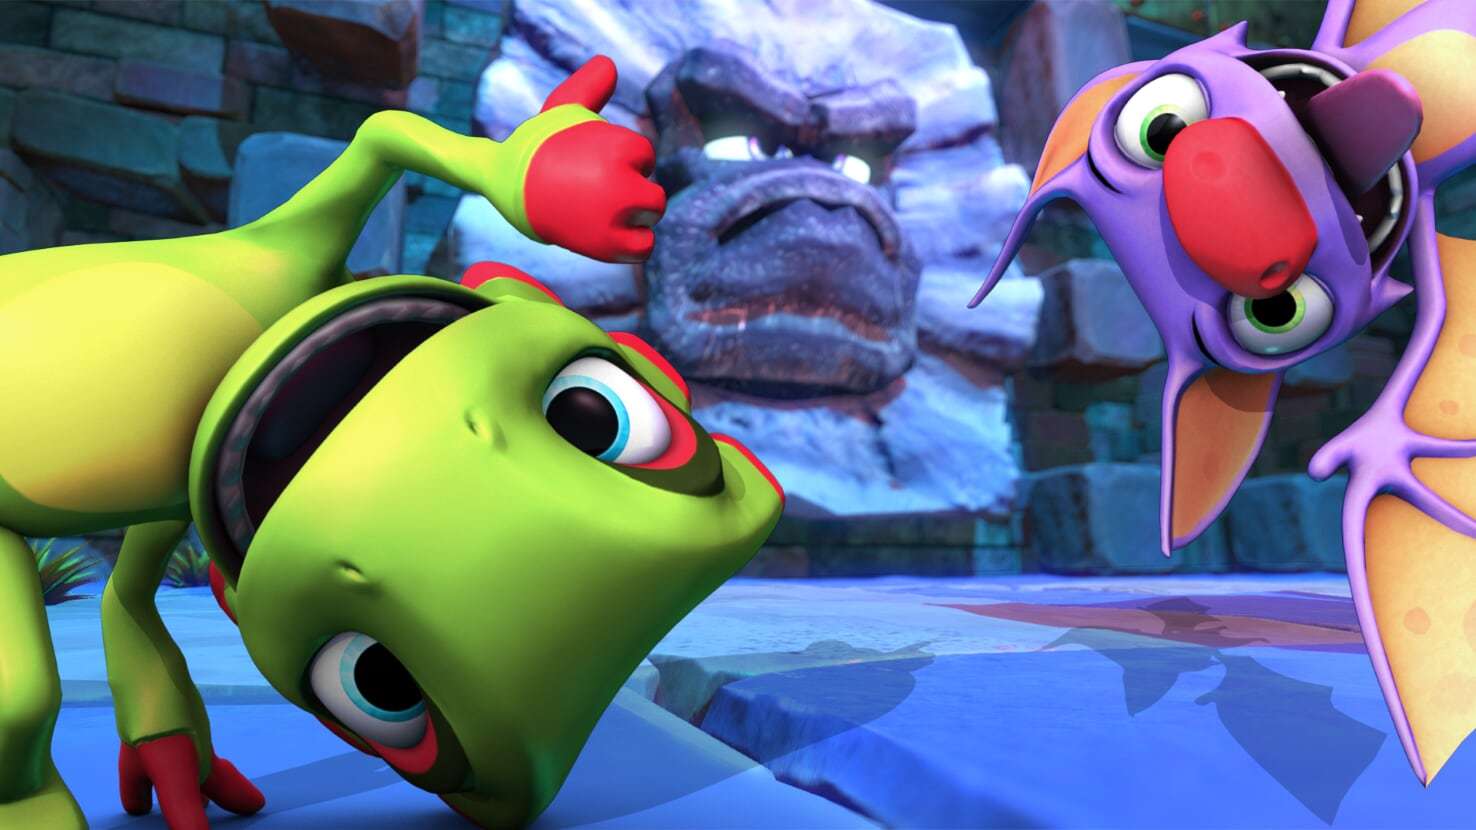 Yooka and Laylee are in Fall Guys!